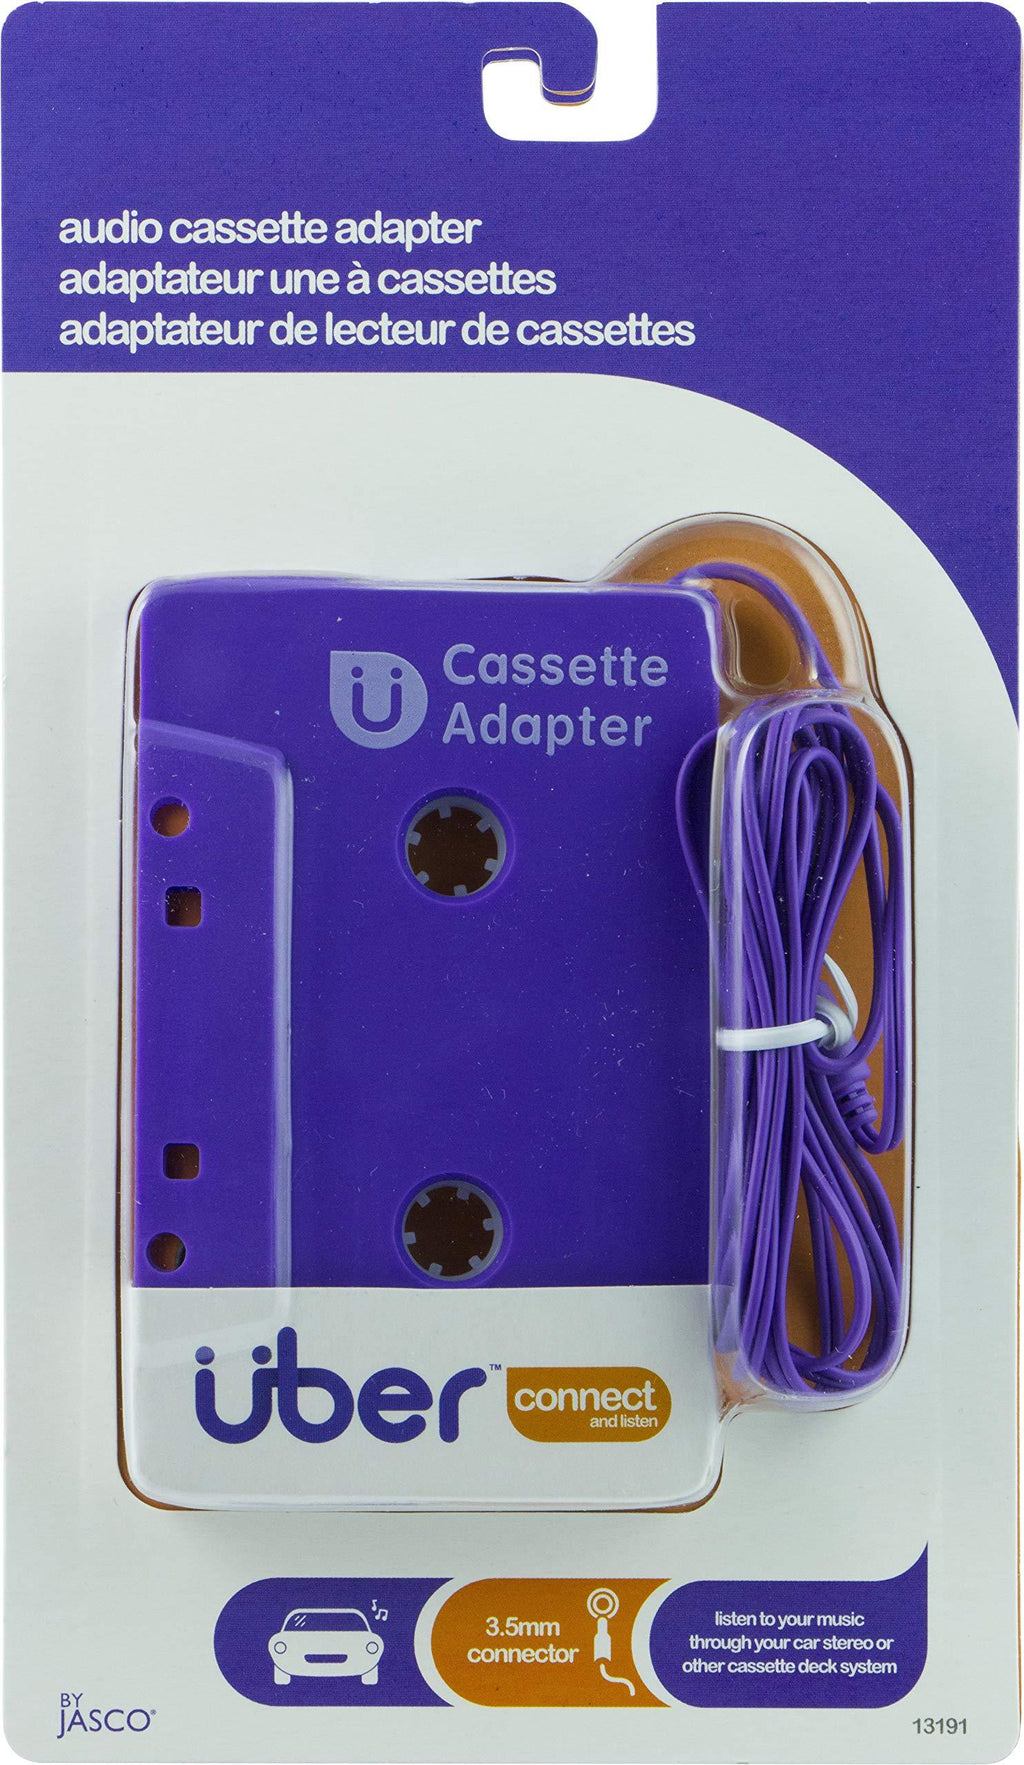 Uber Car Stereo Cassette to Aux Adapter, 3.5mm Headphone Jack, for Smartphone, Tablet, iPod, CD Player, and Other Mobile Devices, Purple, 13191 - LeoForward Australia